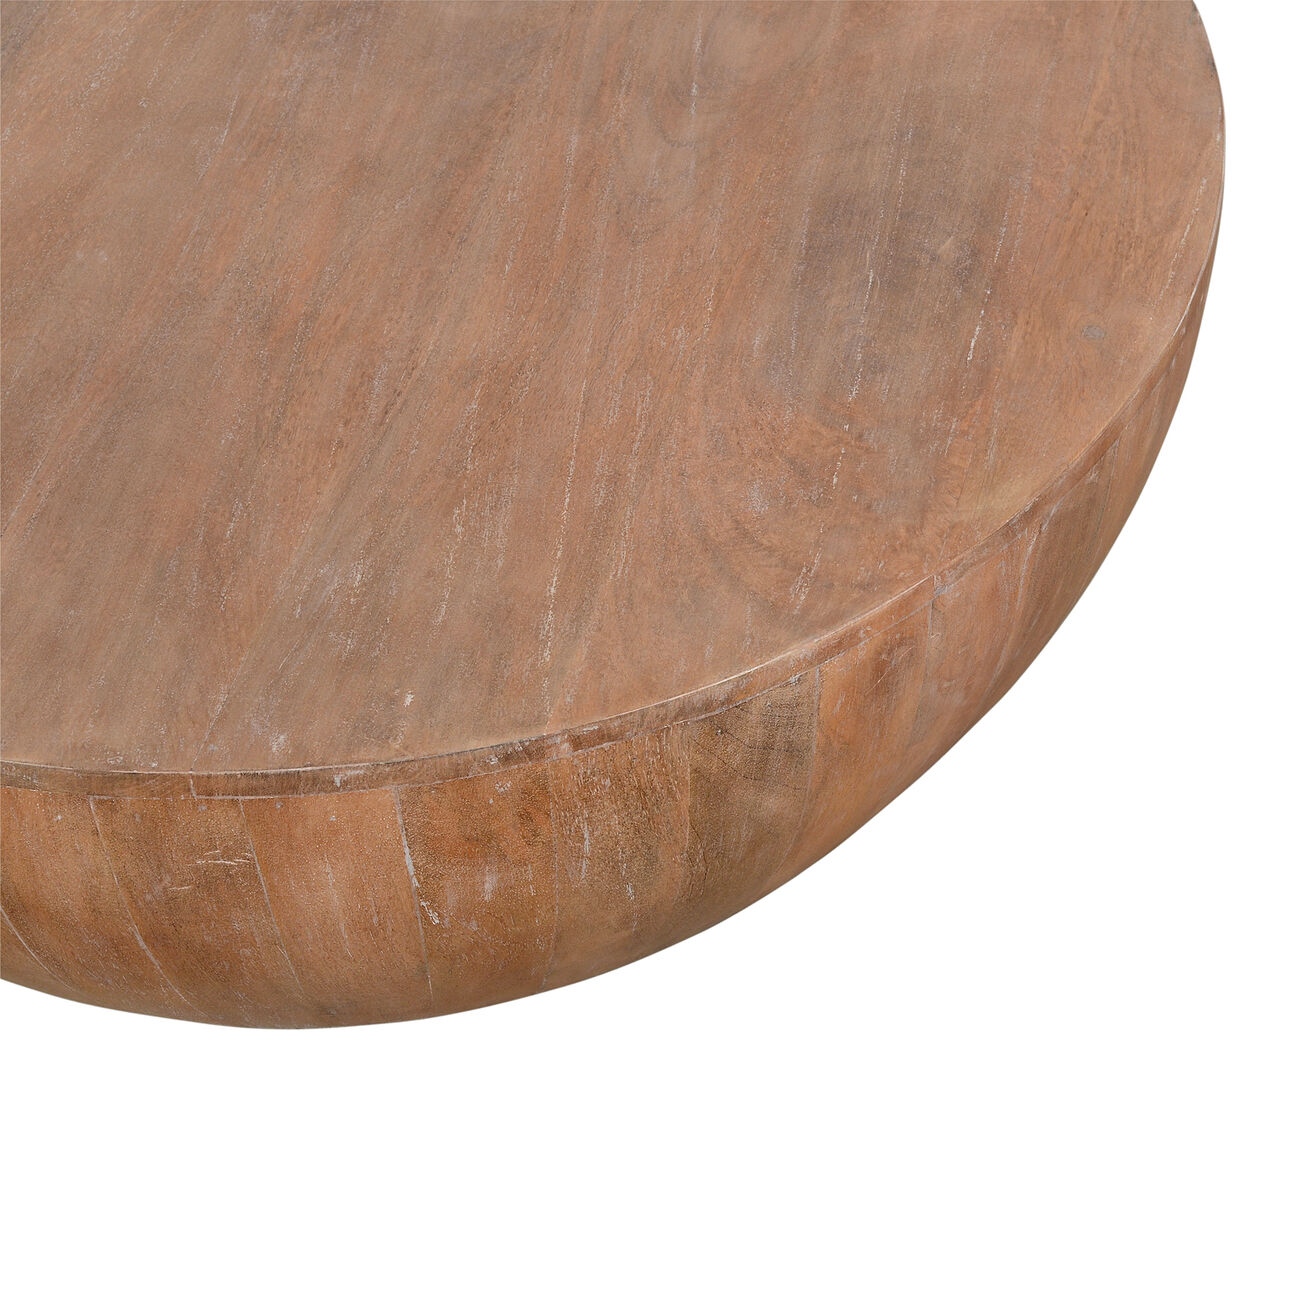 Drum Shape Wooden Coffee Table with Plank Design Base, Distressed Brown